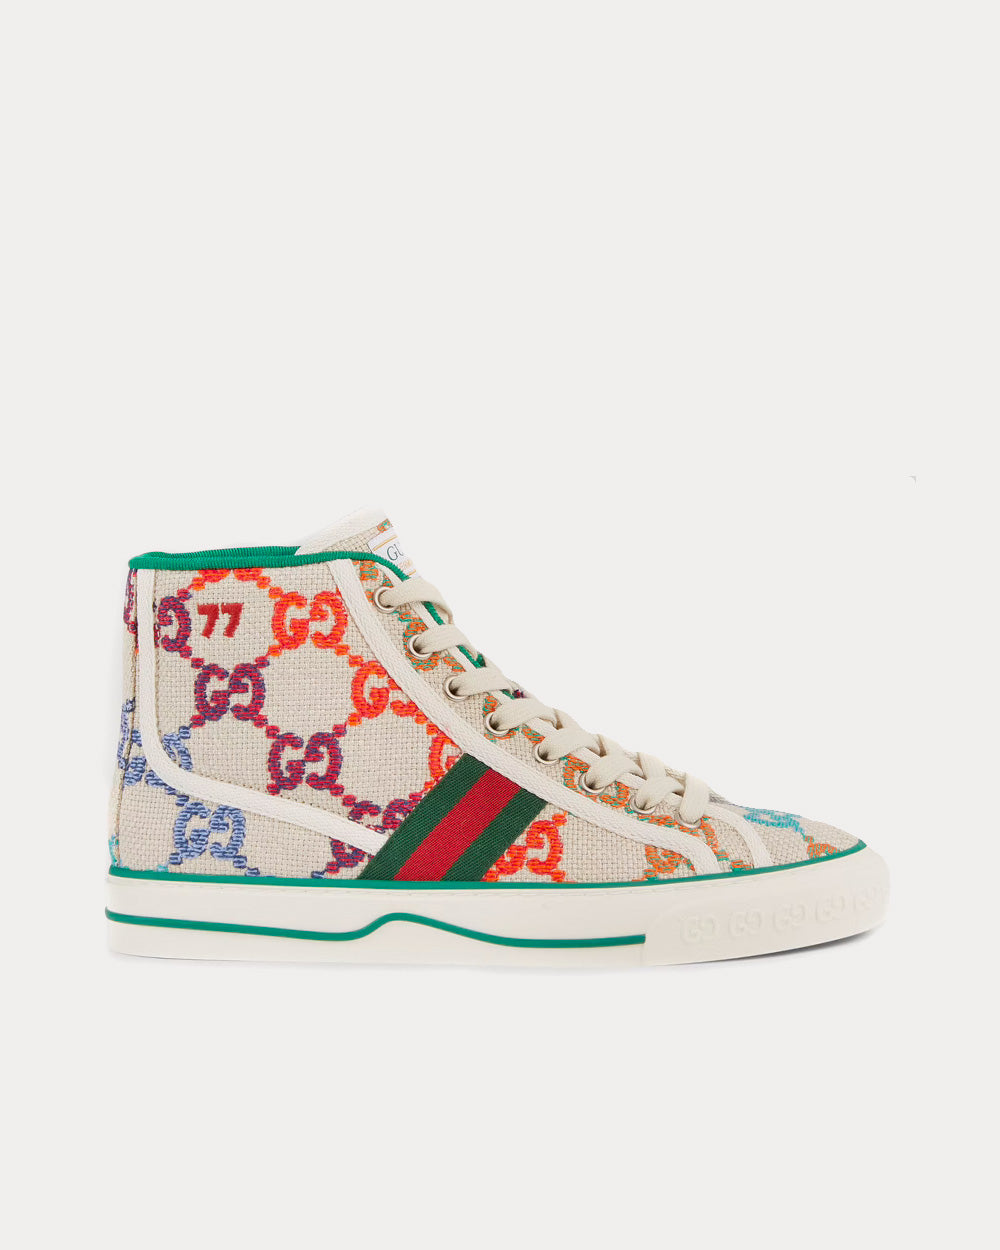 gucci high top sneakers